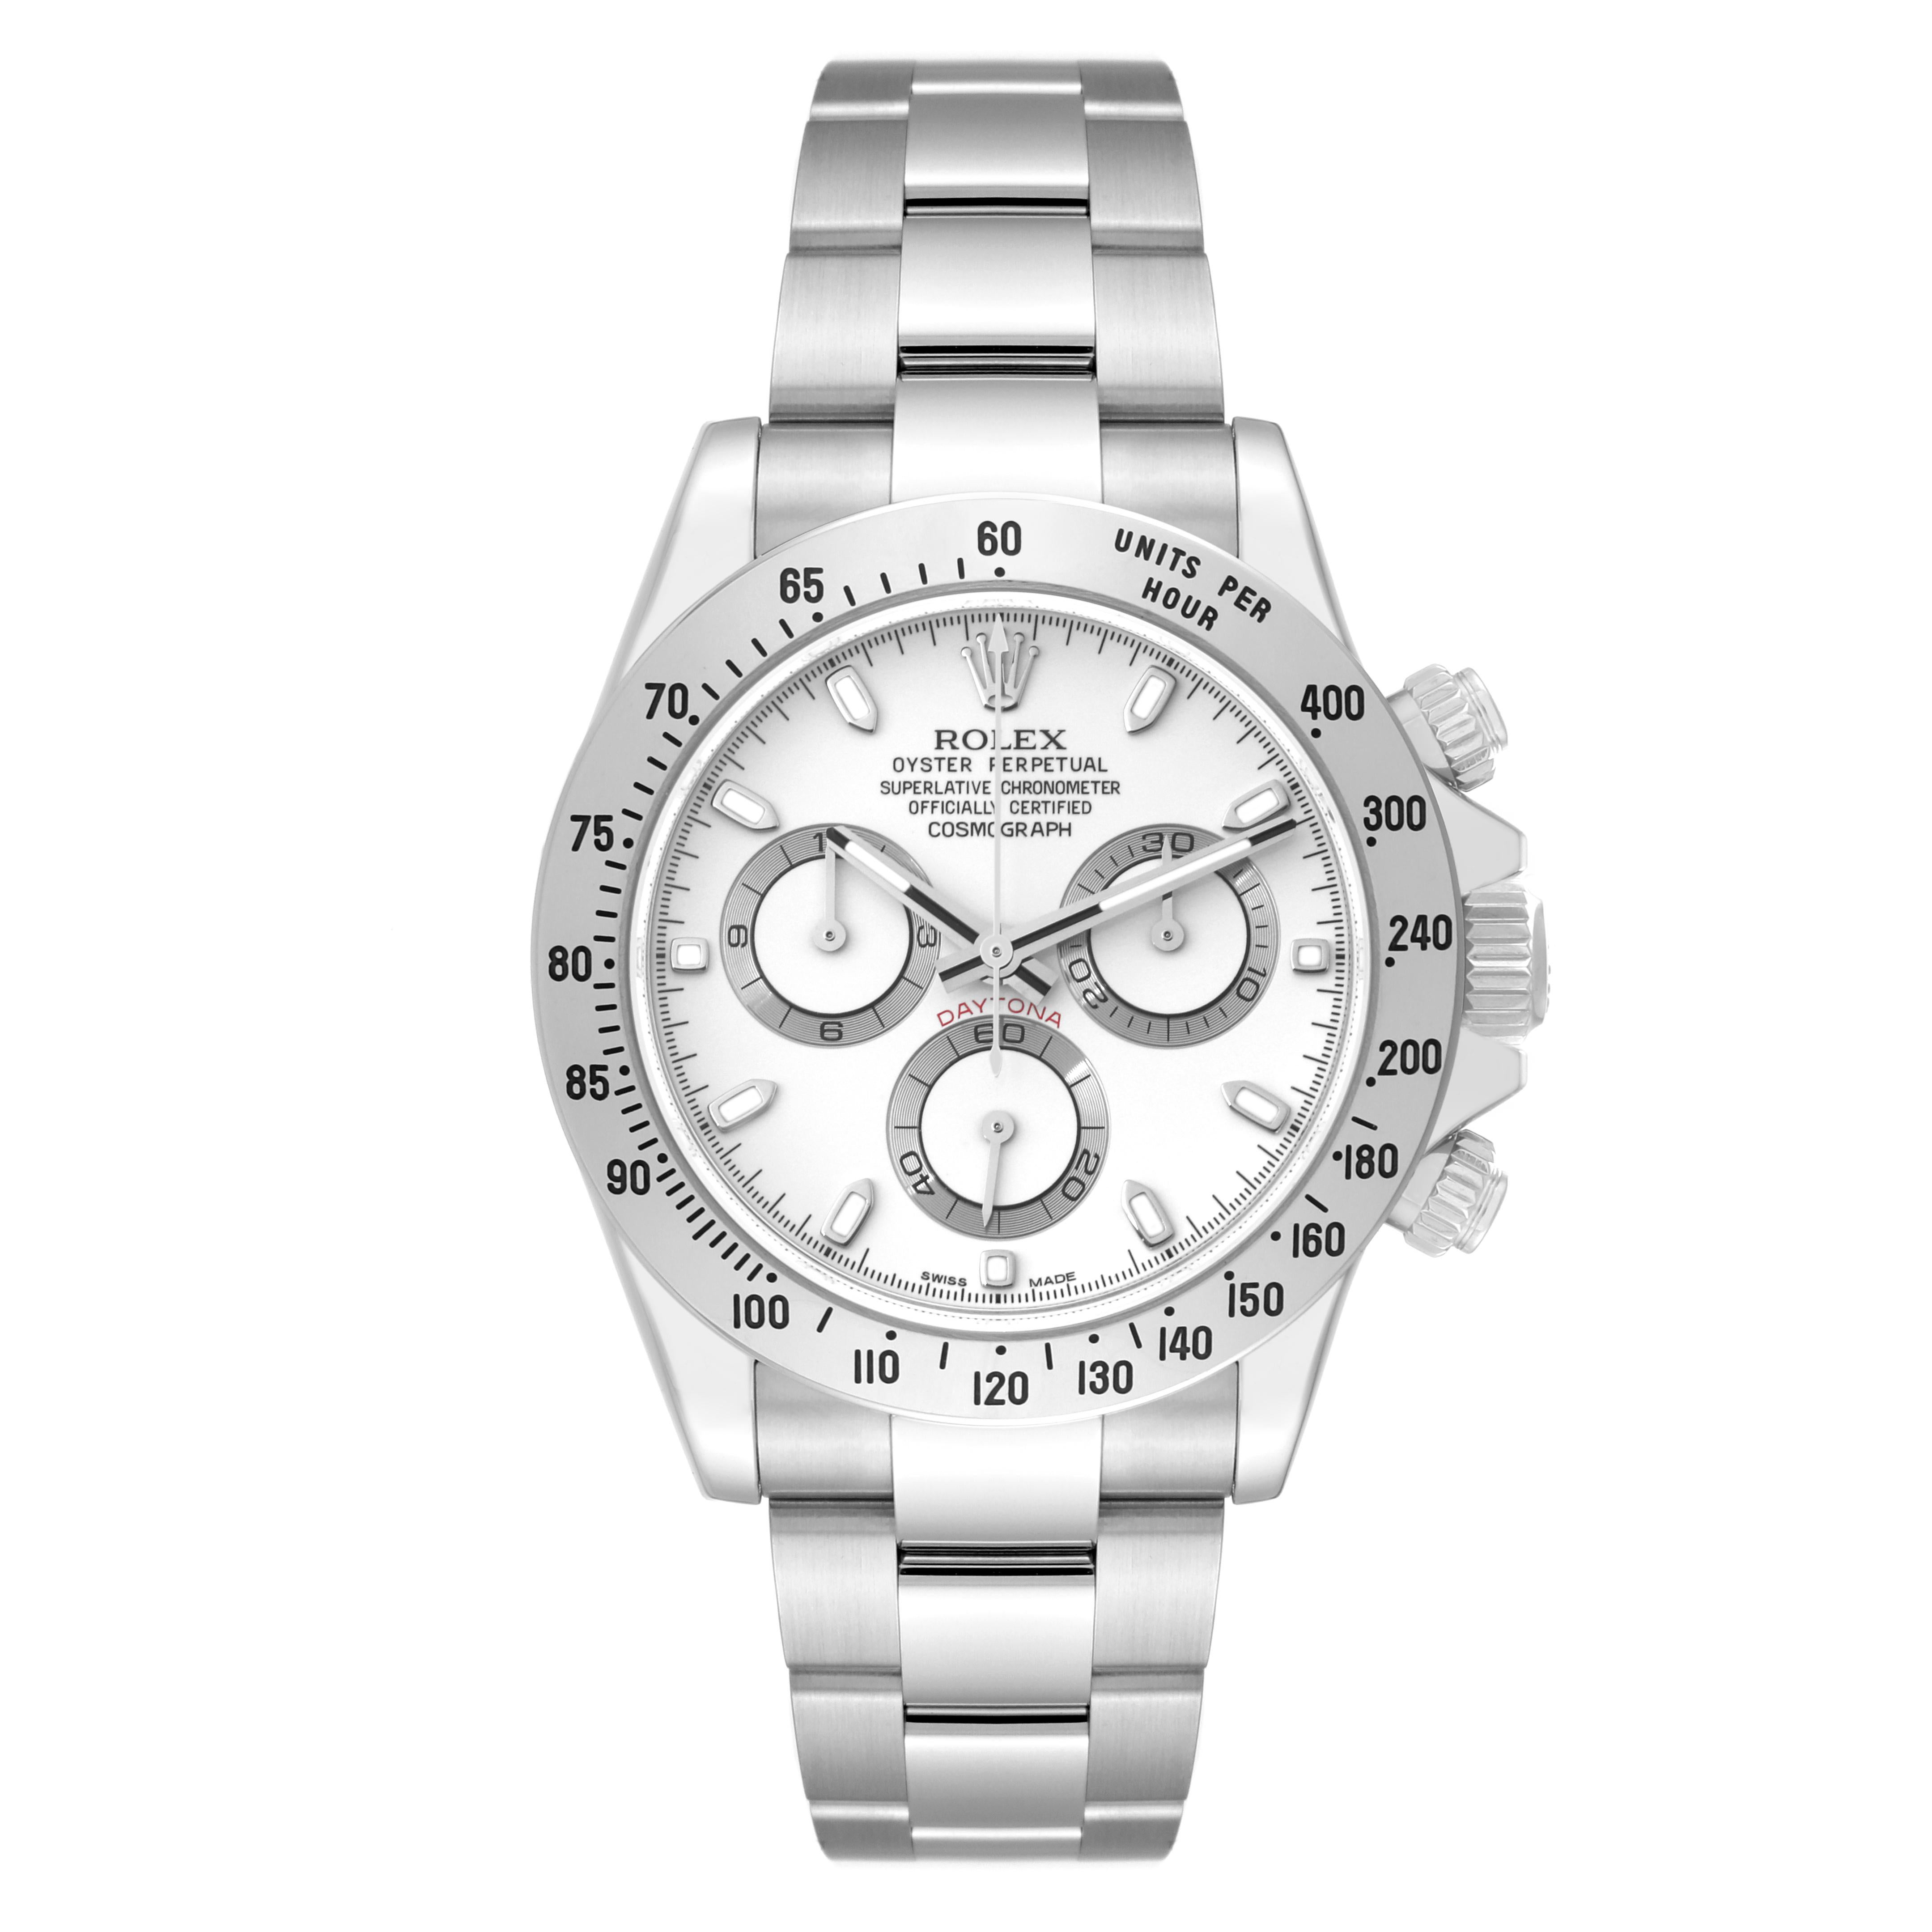 Rolex Daytona White Dial Chronograph Steel Mens Watch 116520. Officially certified chronometer automatic self-winding Chronograph movement. Stainless steel case 40.0 mm in diameter. Special screw-down push buttons. Stainless steel tachymeter